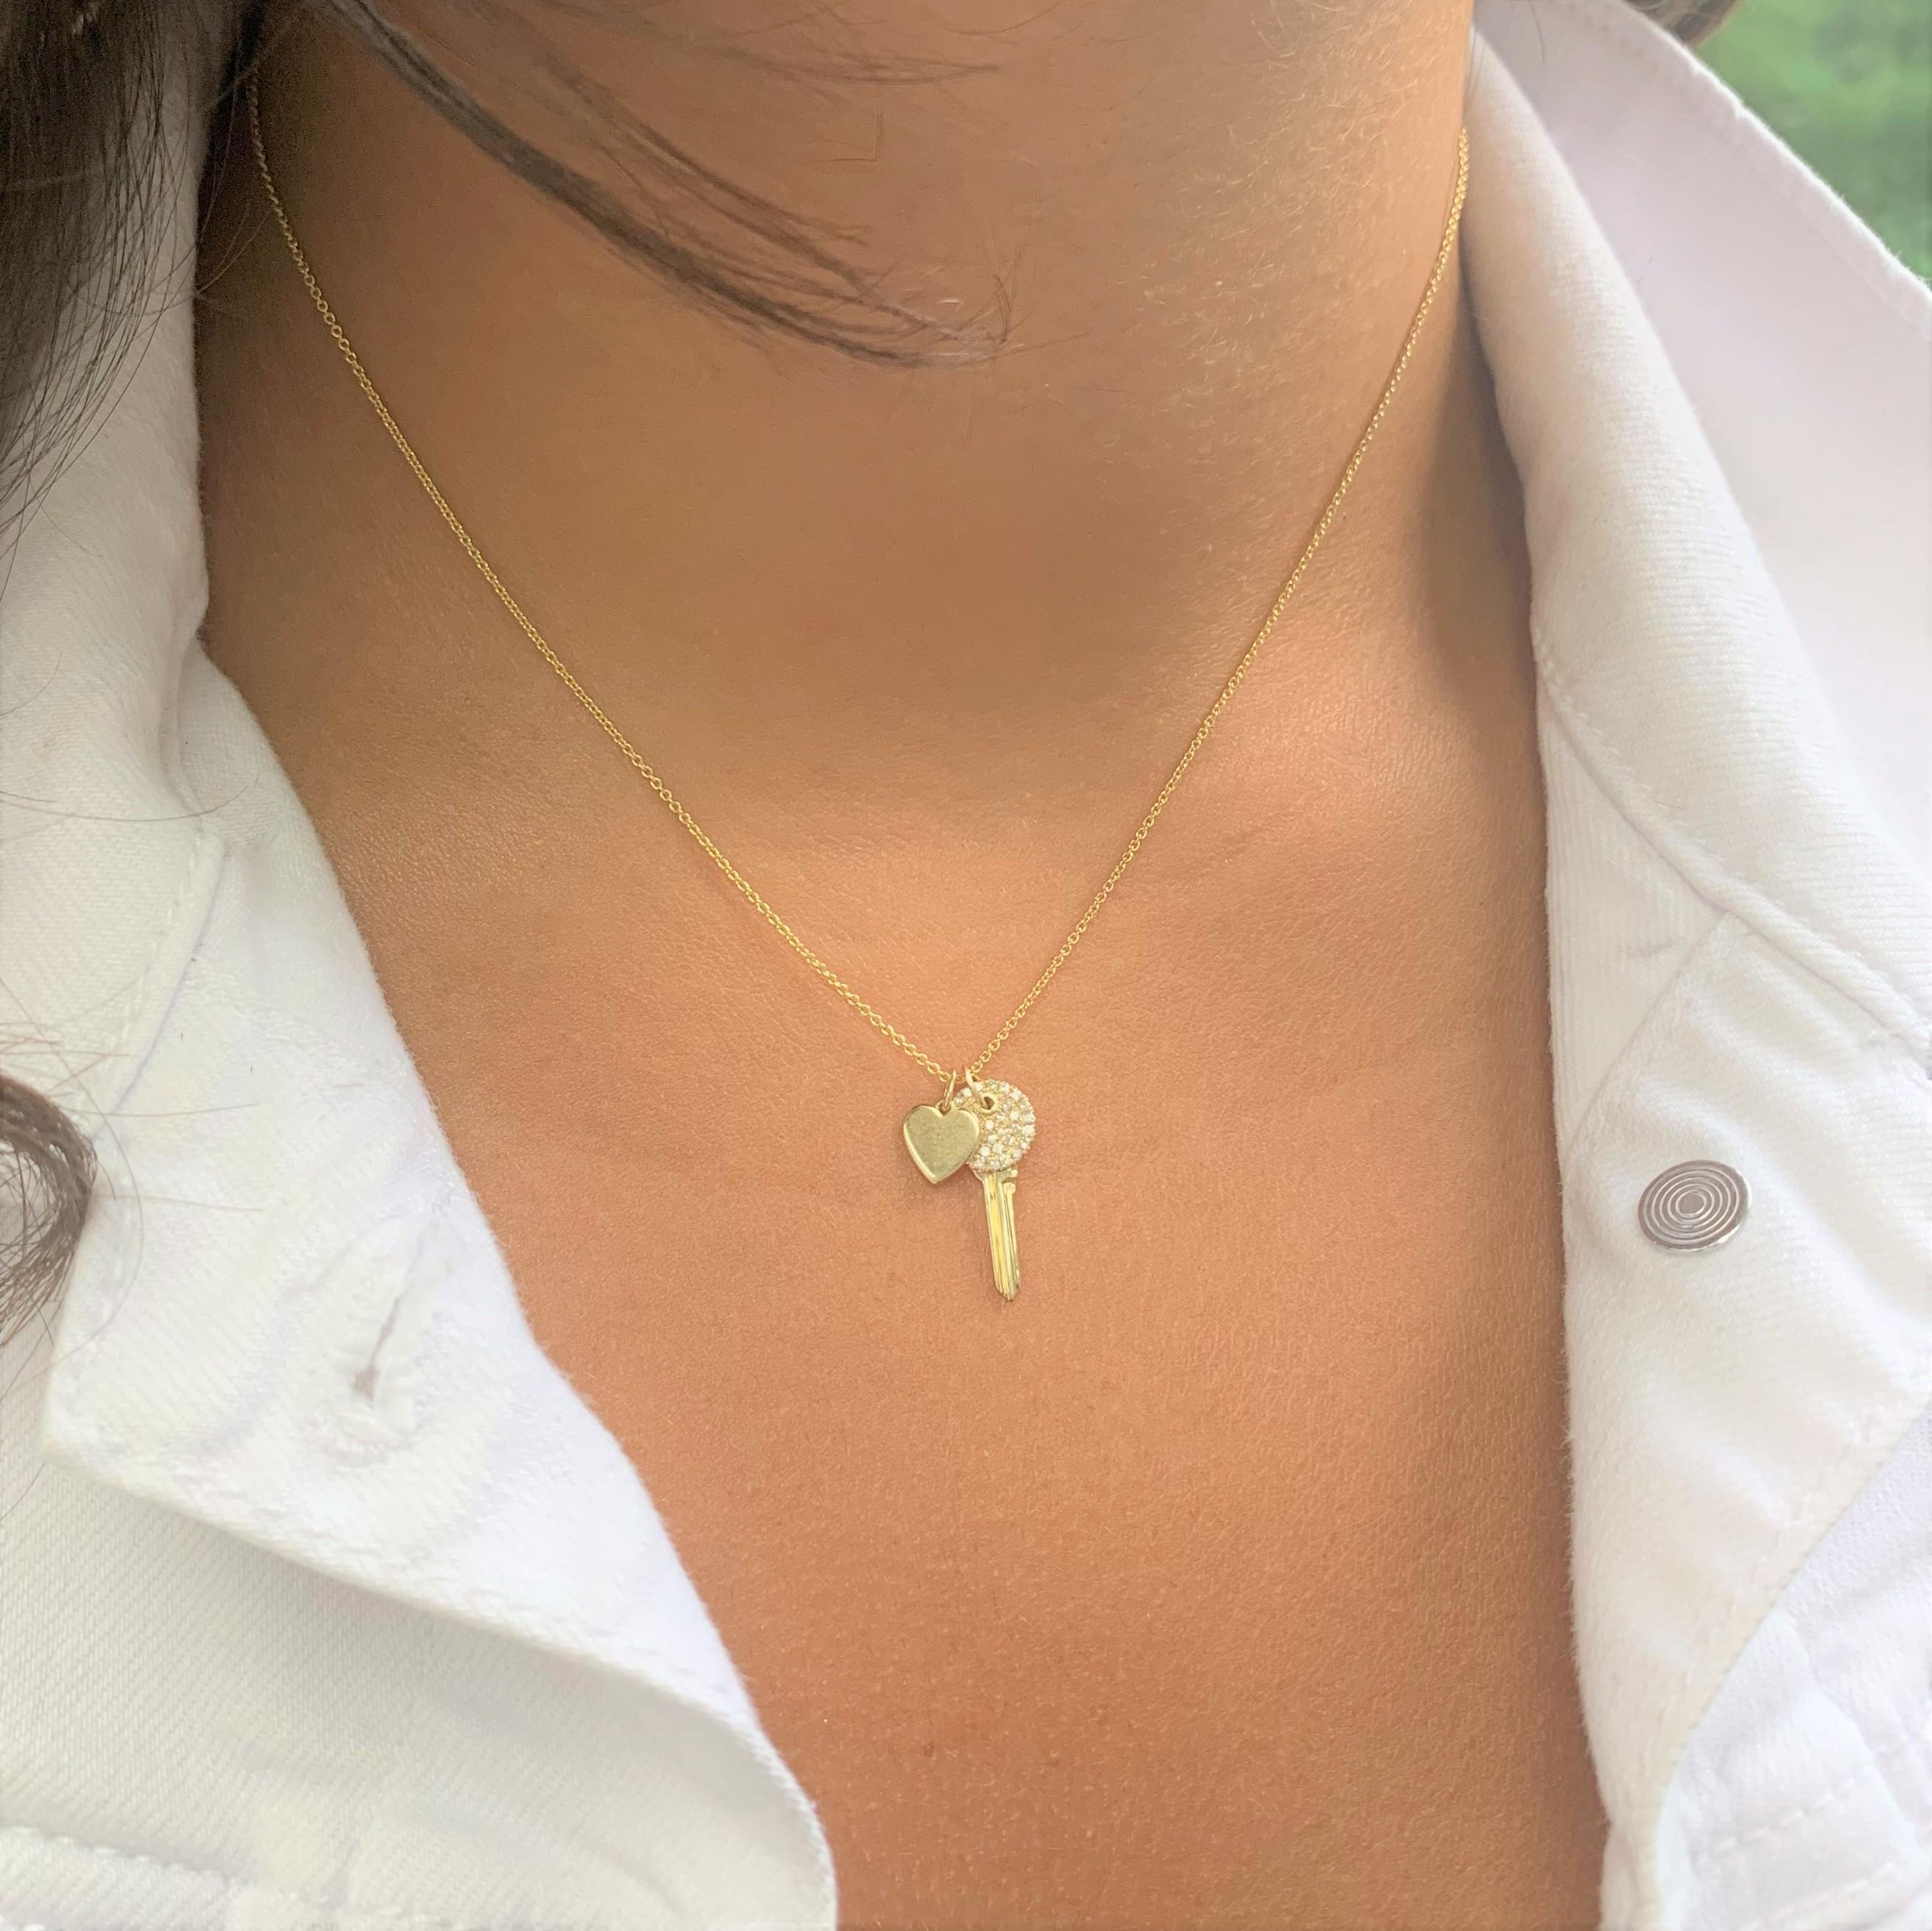 Unlock the Key to your Heart or the Heart of a Loved one :) This Beautiful Pendant is crafted of 14K Yellow Gold and features 0.14 ct. of round white diamonds on an adjustable 16